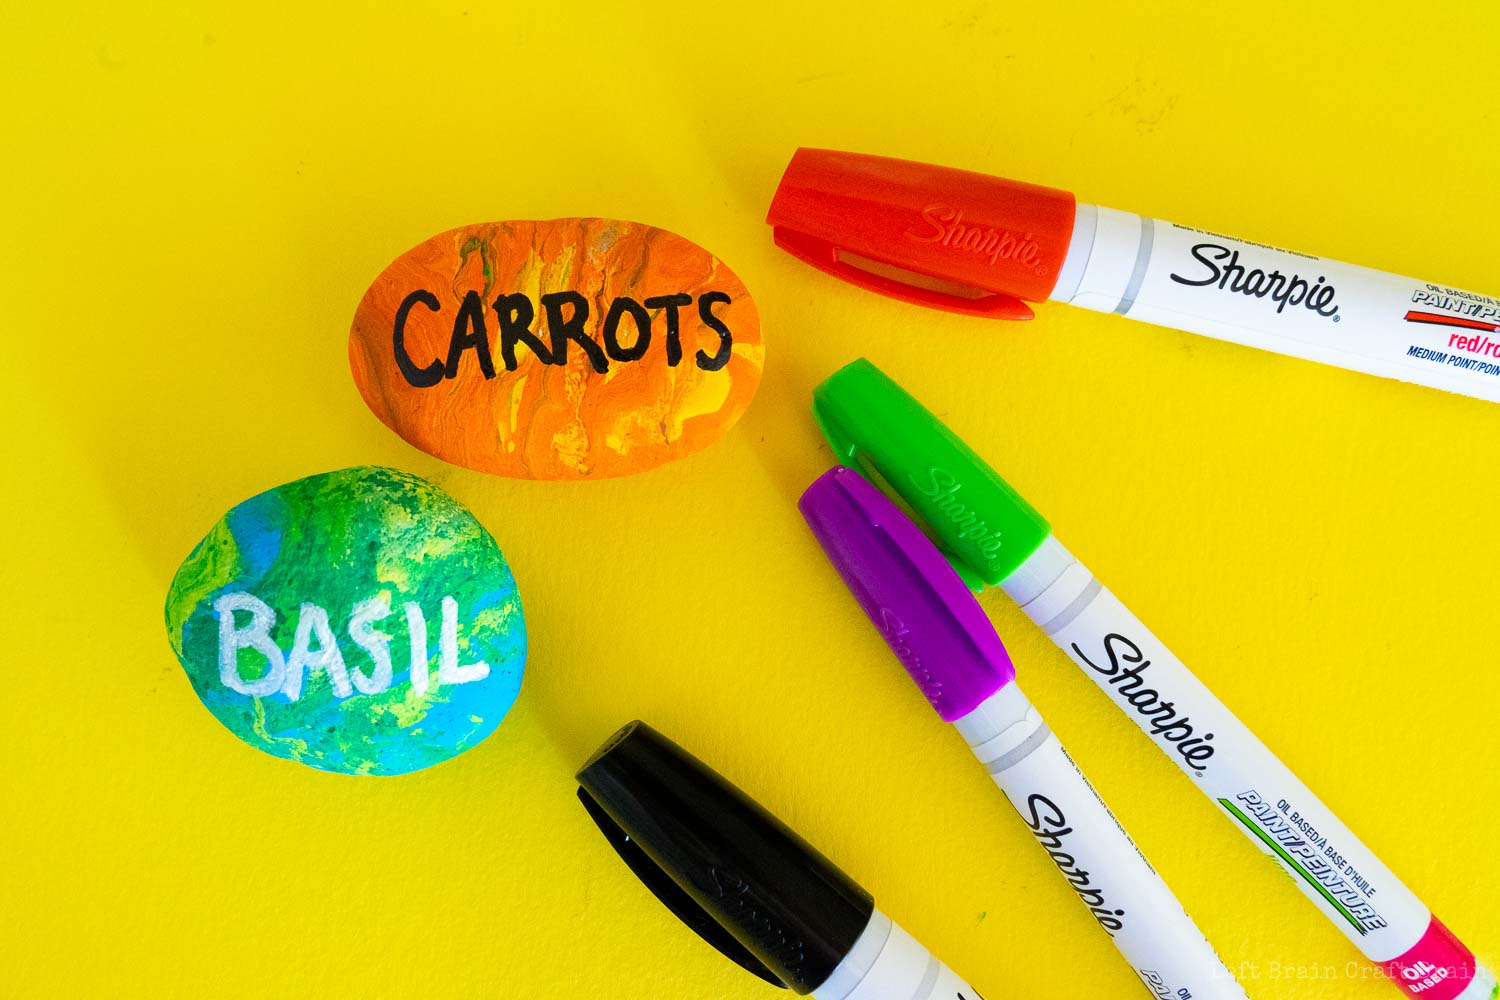 carrots and basil rocks with sharpie paint markers